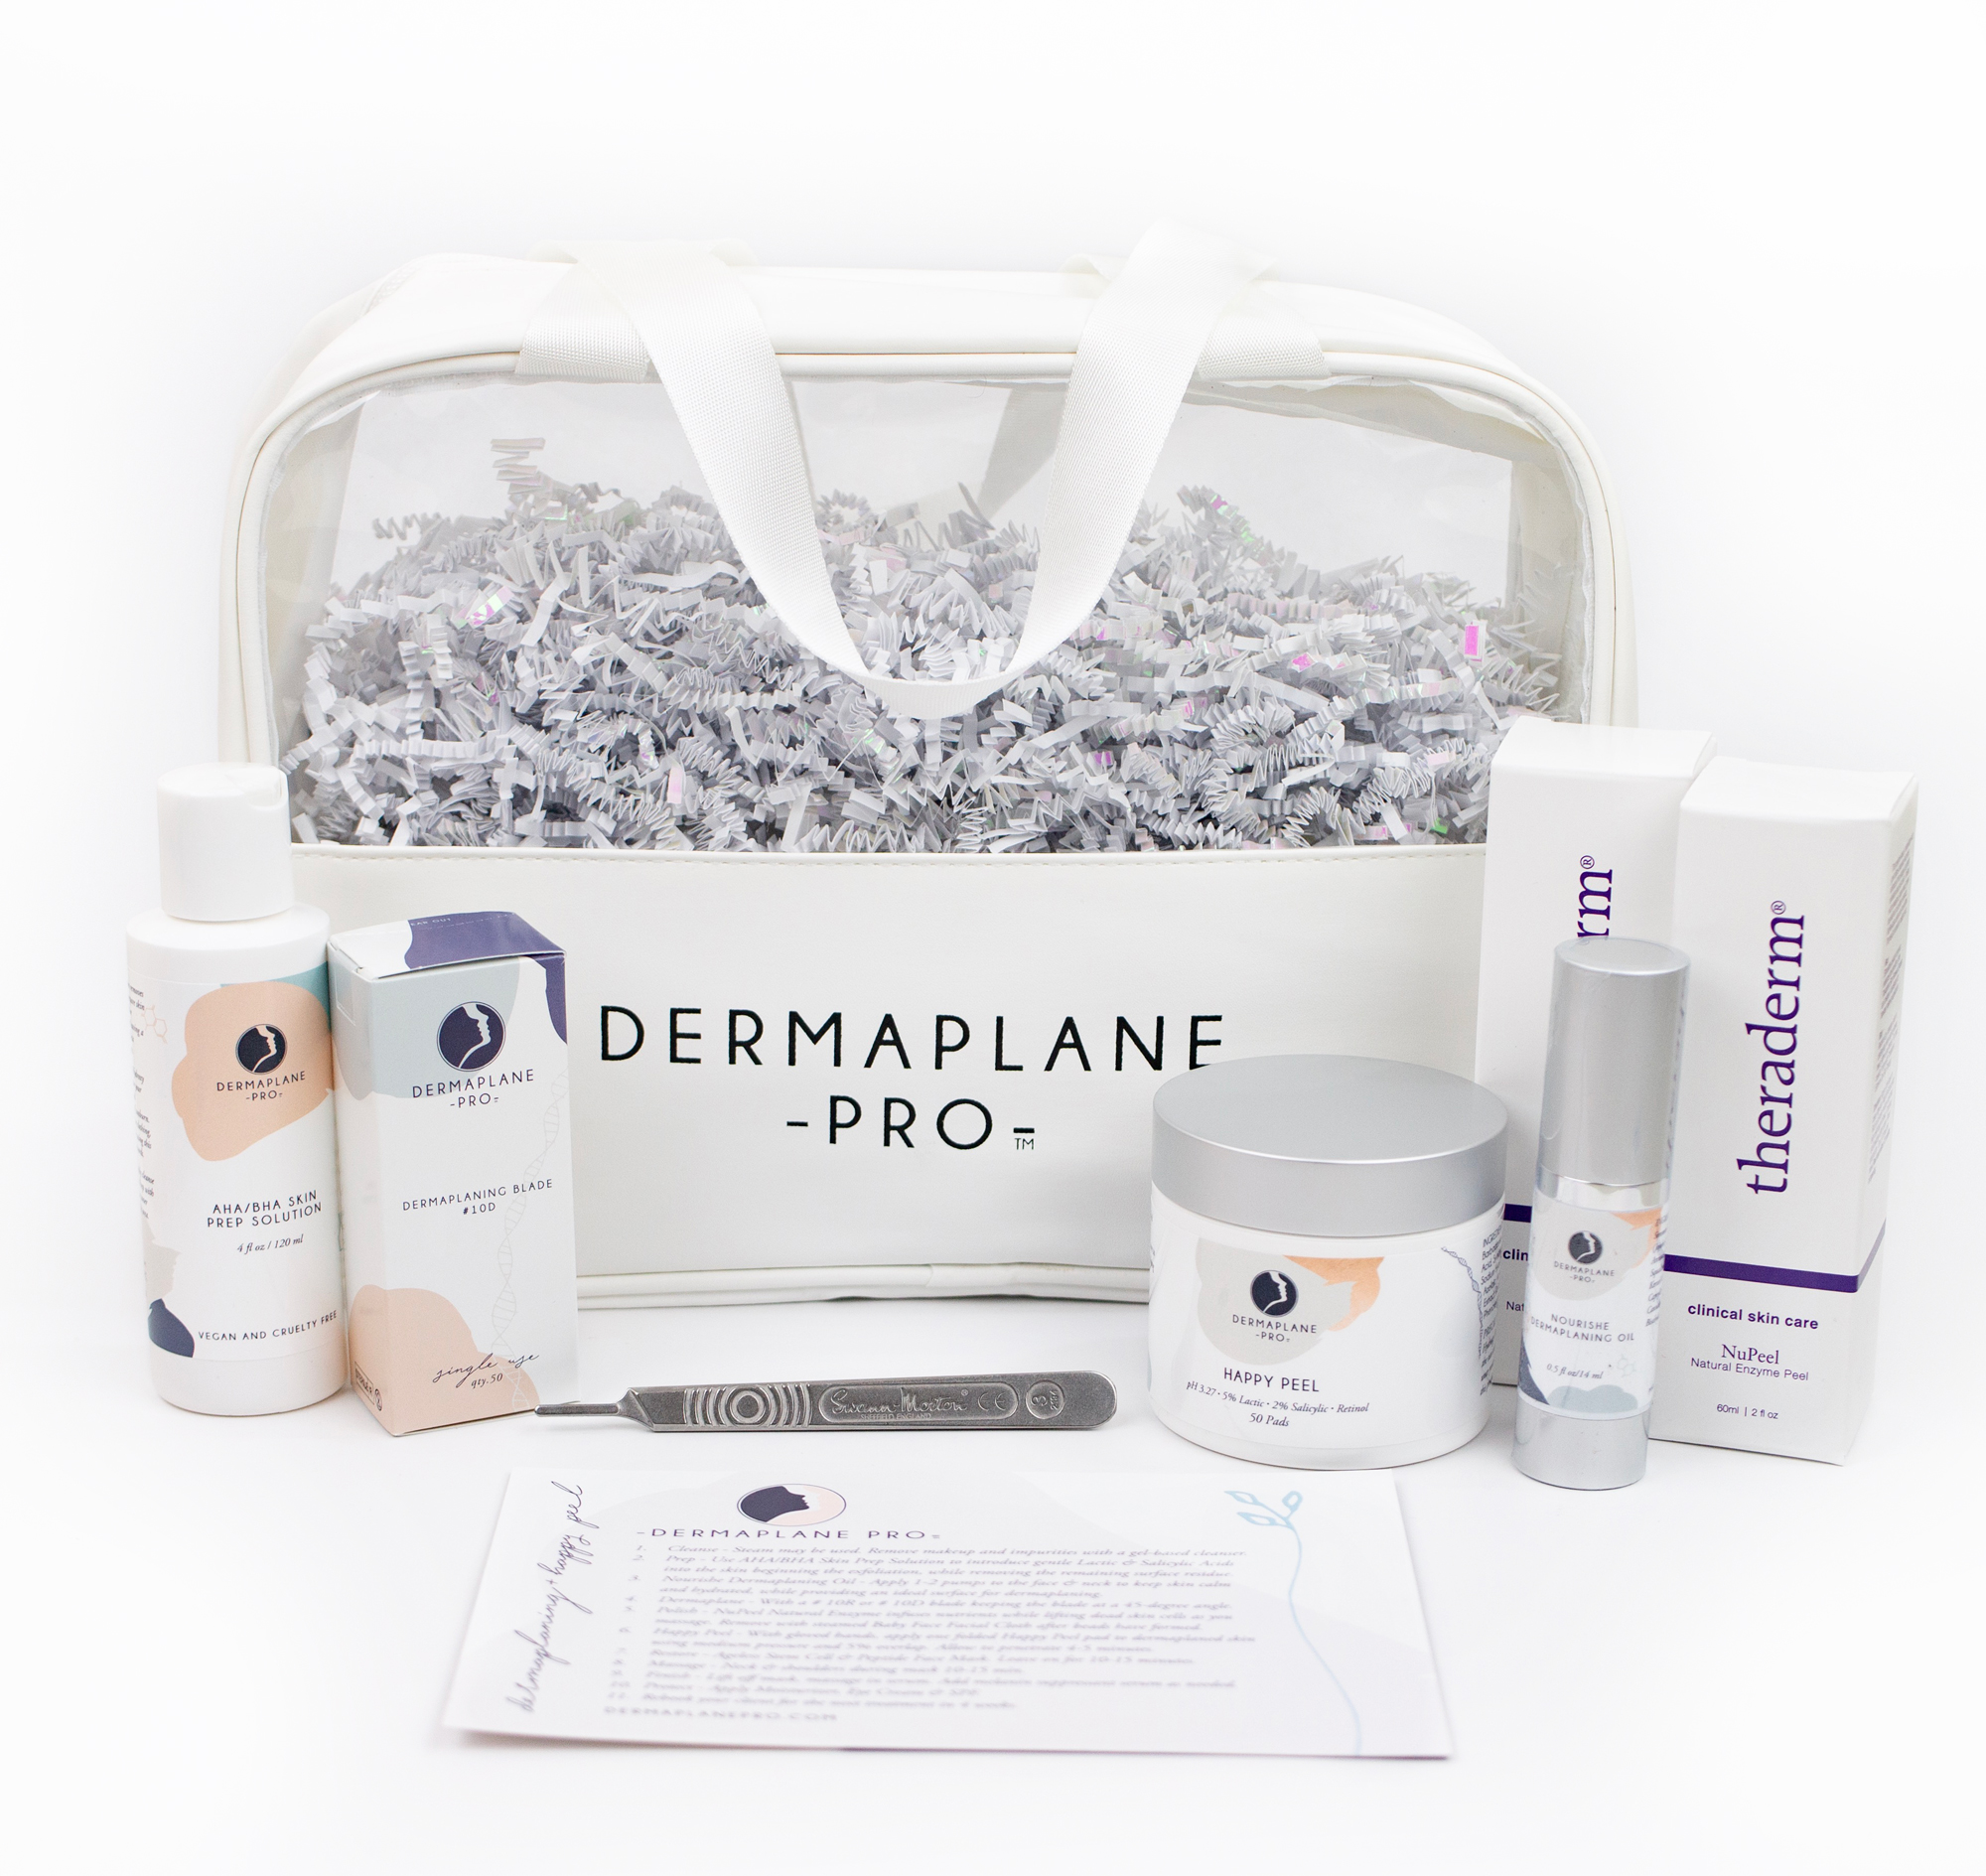 DermaplanePro Happy Peel Protocol Kit with tote bag to perform dermaplaning facials including peel for dermaplaning.